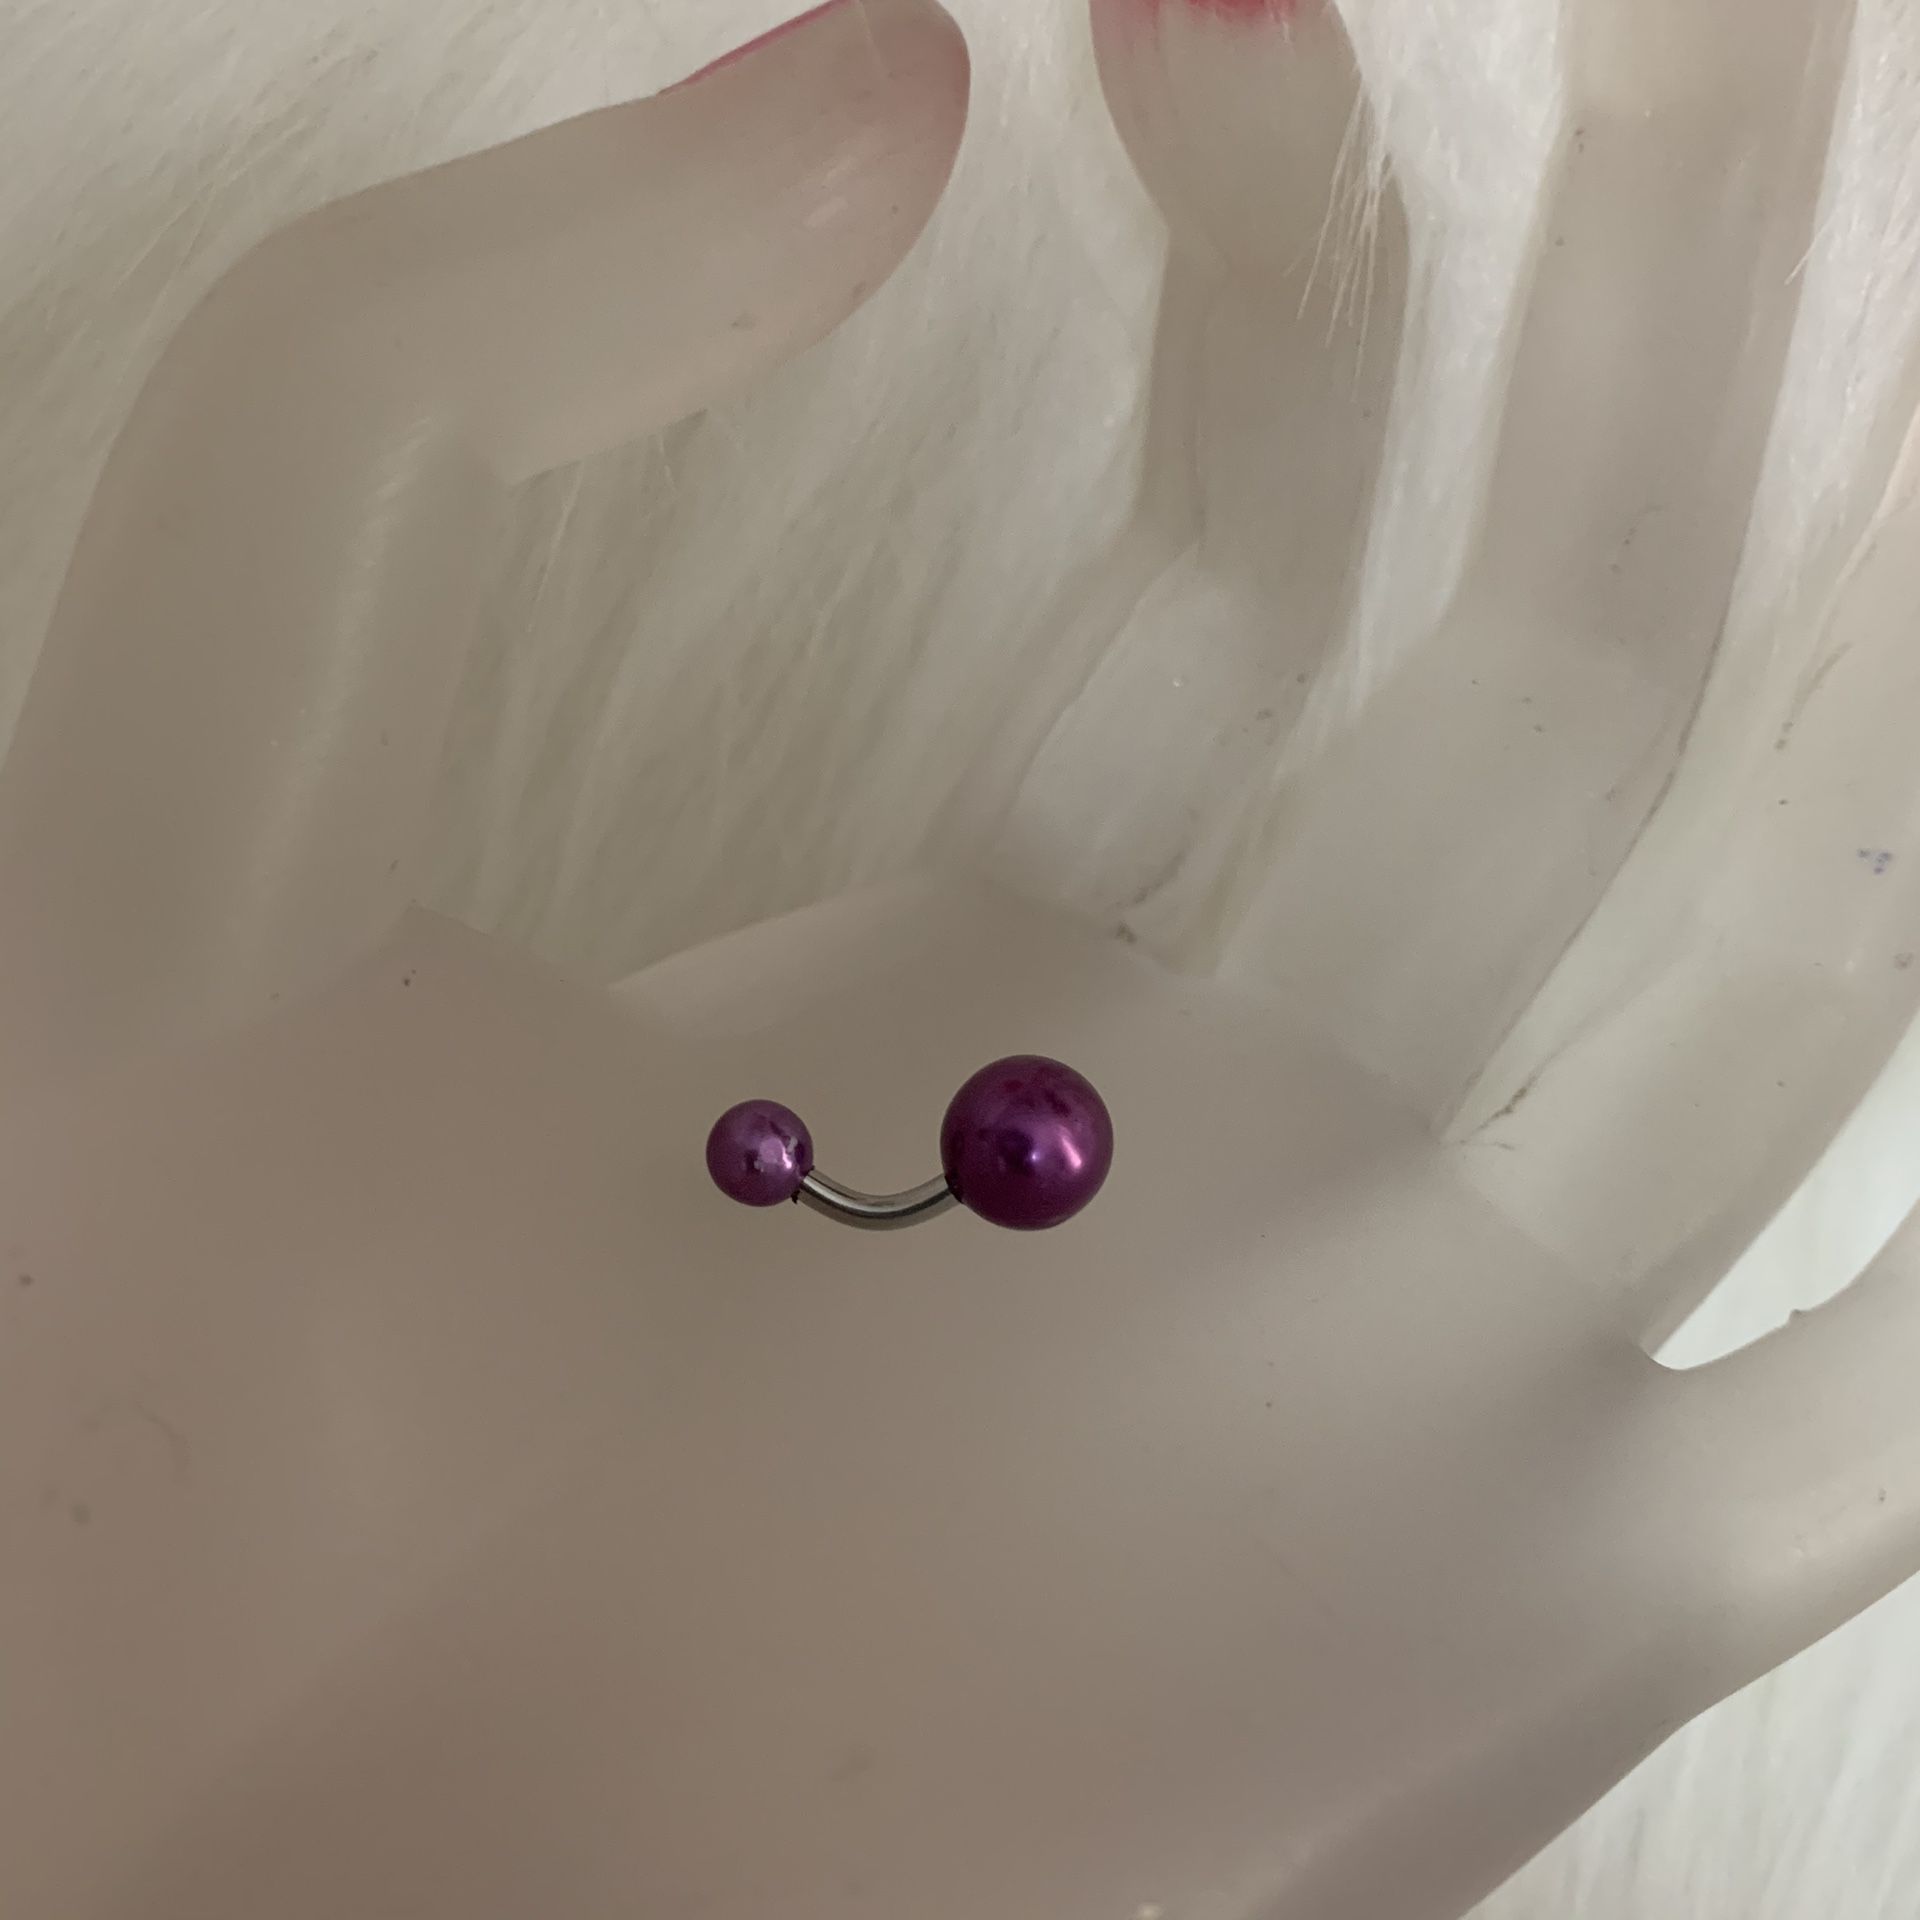 NWOT purple ball belly button ring